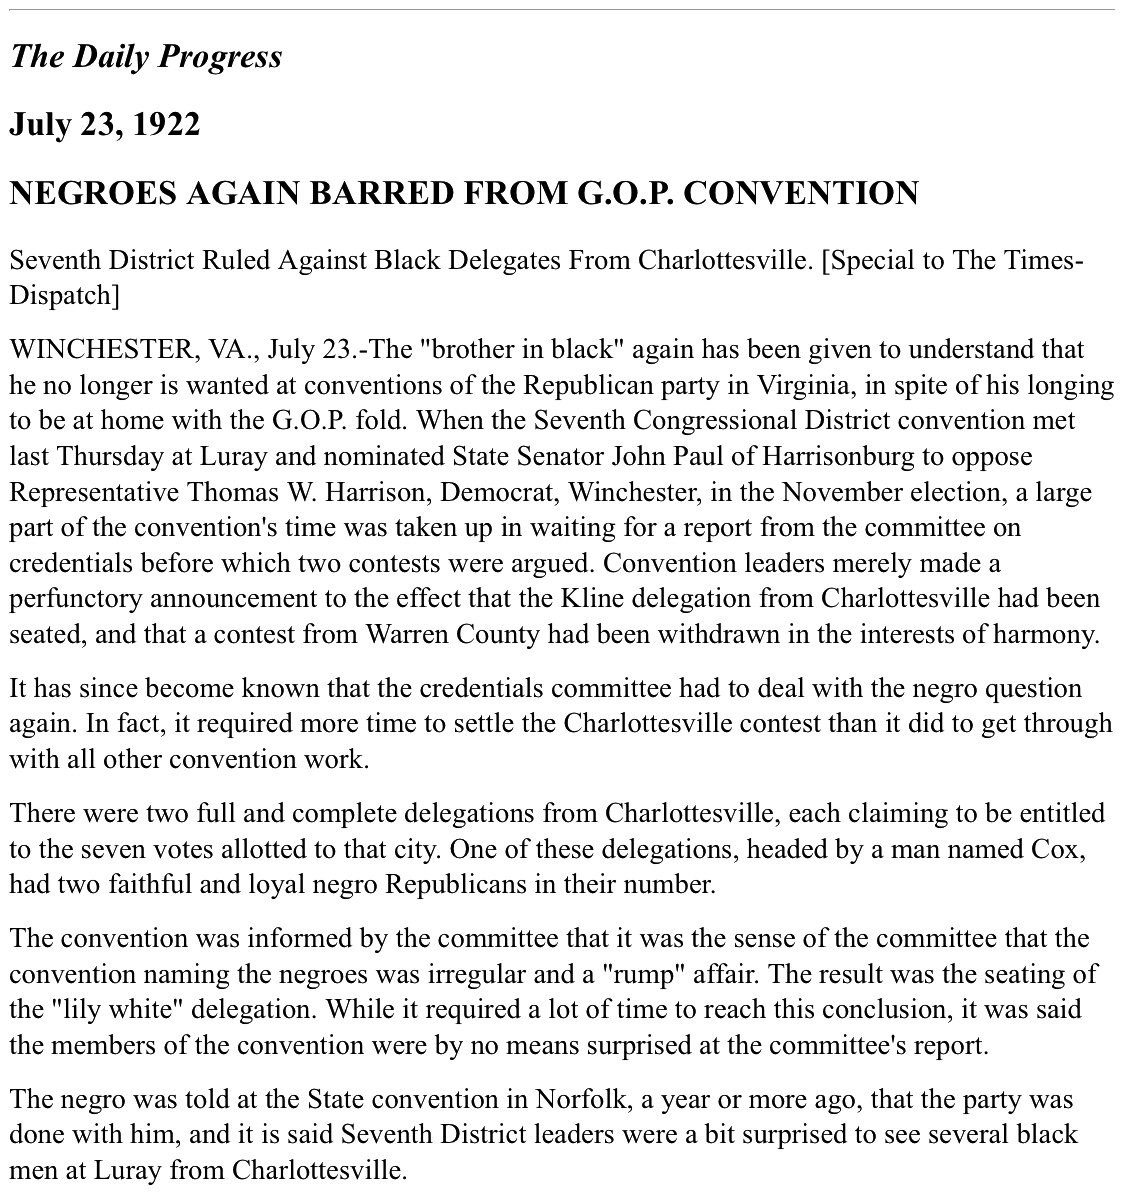 Daily Progress article, "NEGROES AGAIN BARRED FROM G.O.P. CONVENTION." Reported the dismissal of the Cox delegation and the seating of Flannagan's "lily-white" delegation.